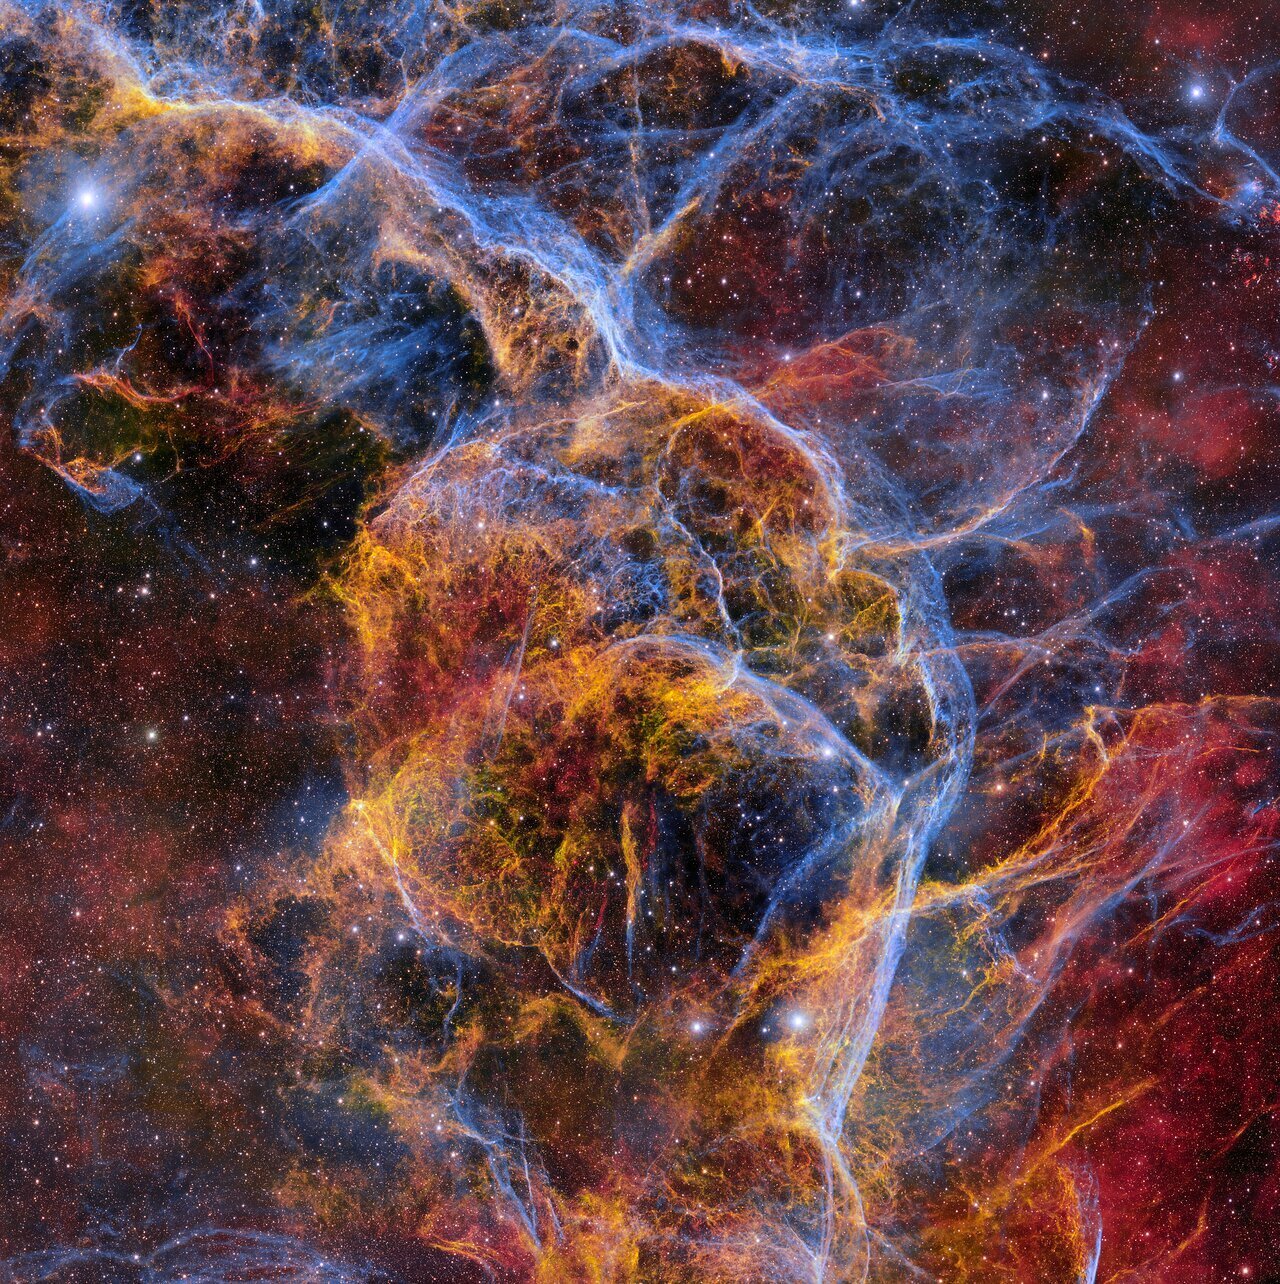 The  Vela Supernova Remnant, created 11,000 years ago when a massive star exploded.